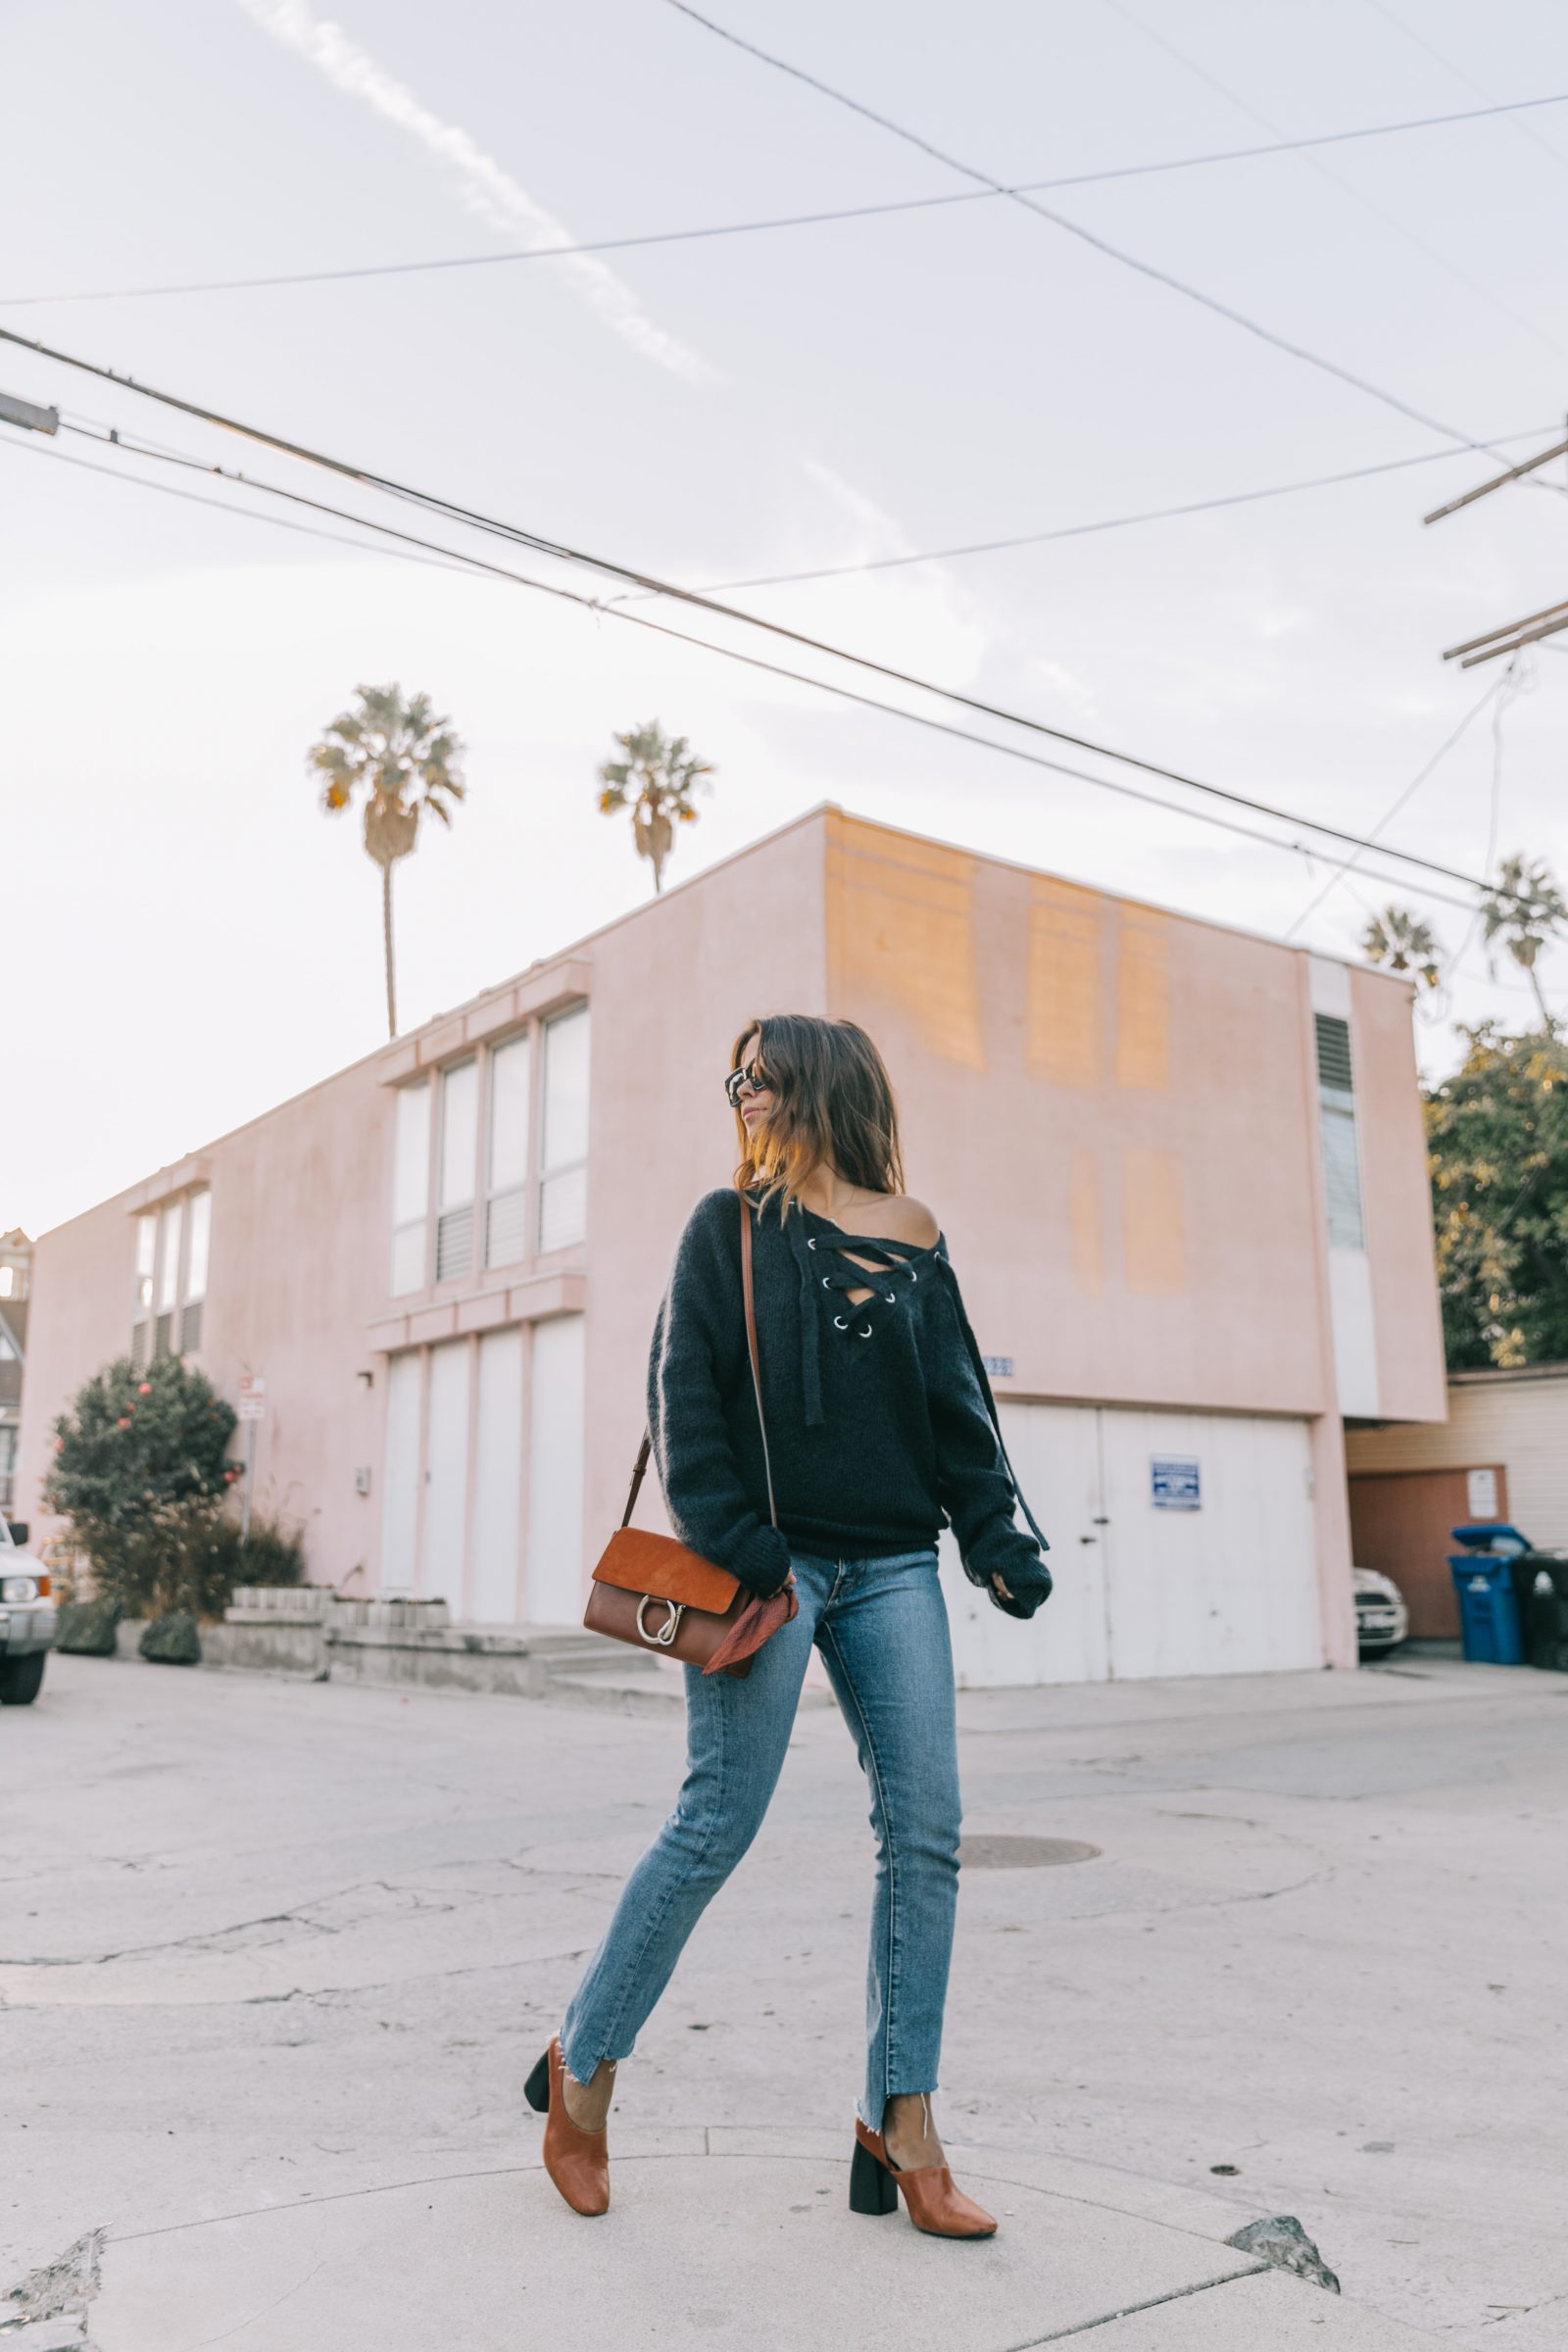 venice_beach-knotted_jumper-levis_jeans-chloe_bag-mango_shoes-horn_necklaces-outfit-street_style-los_angeles-collage_vintage-107